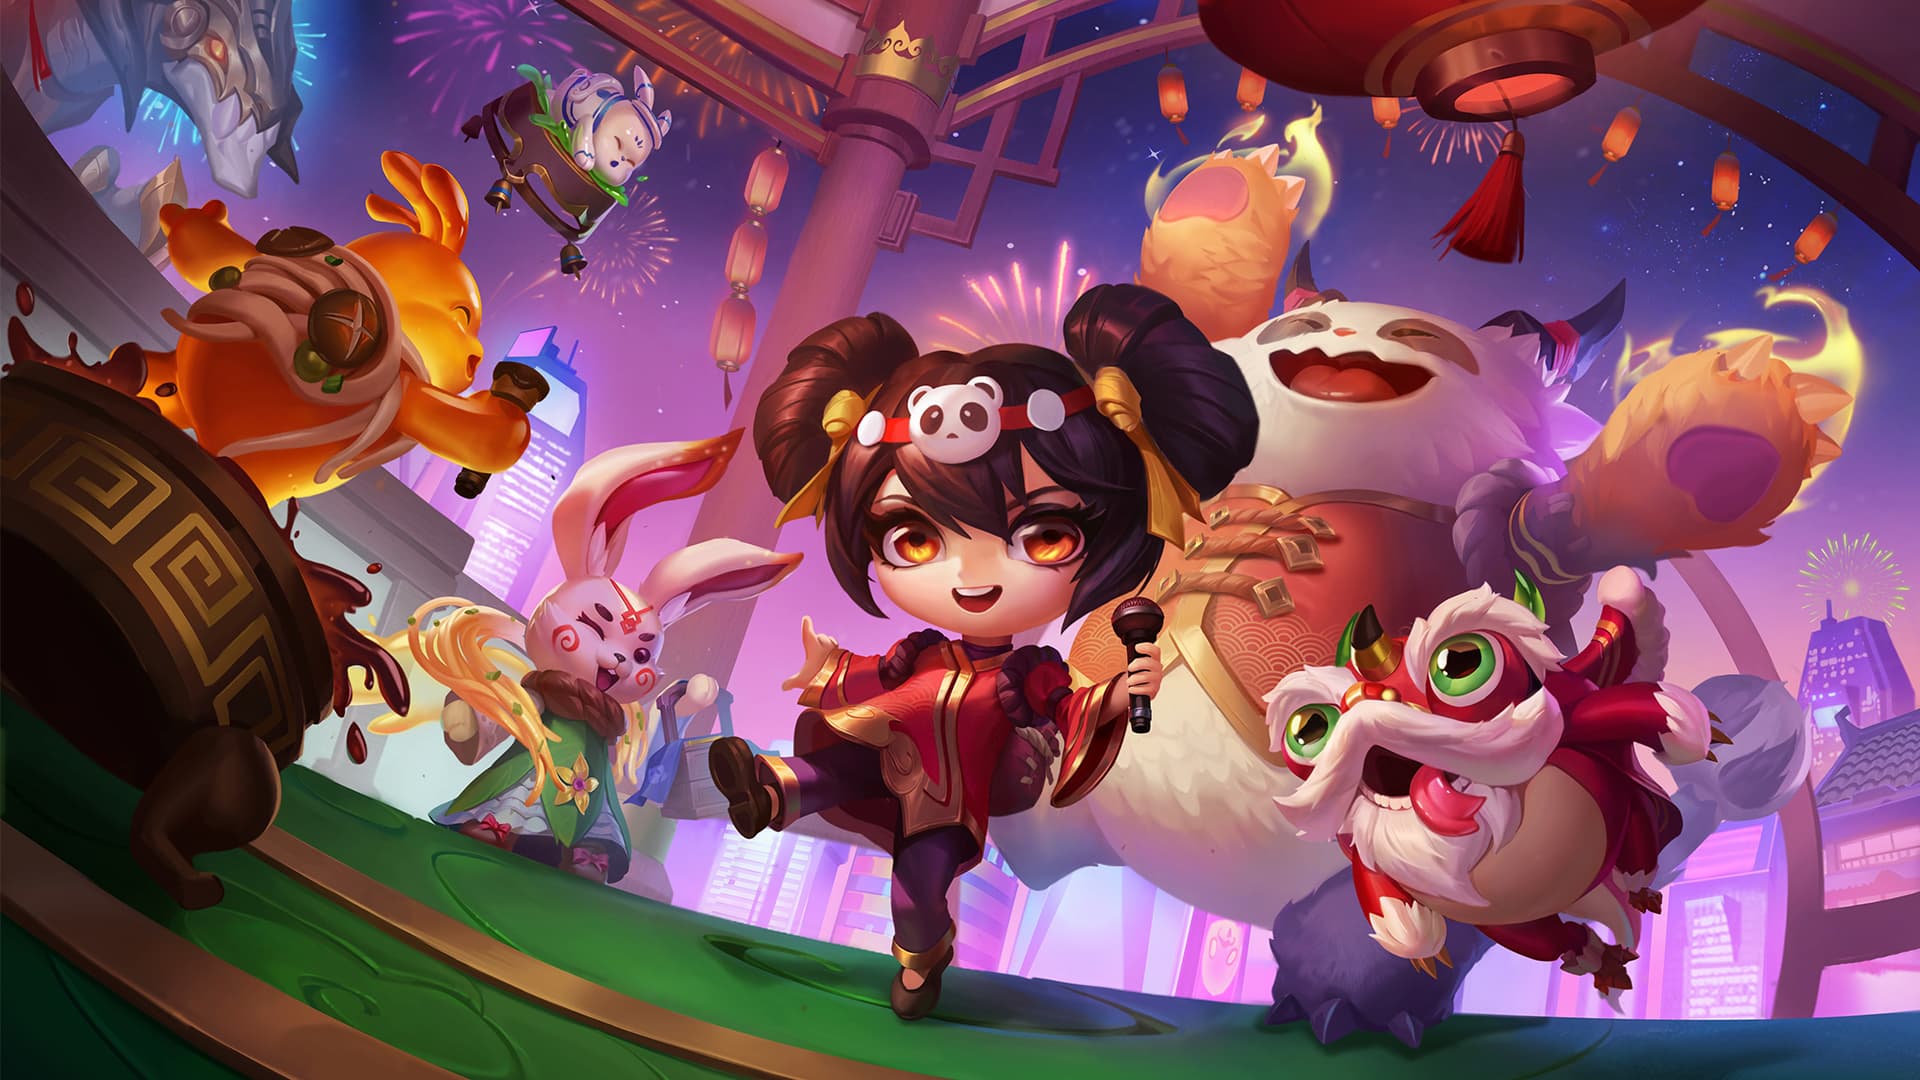 Fortune awaits with TFT's new game mode and launch of Lunar Gala event